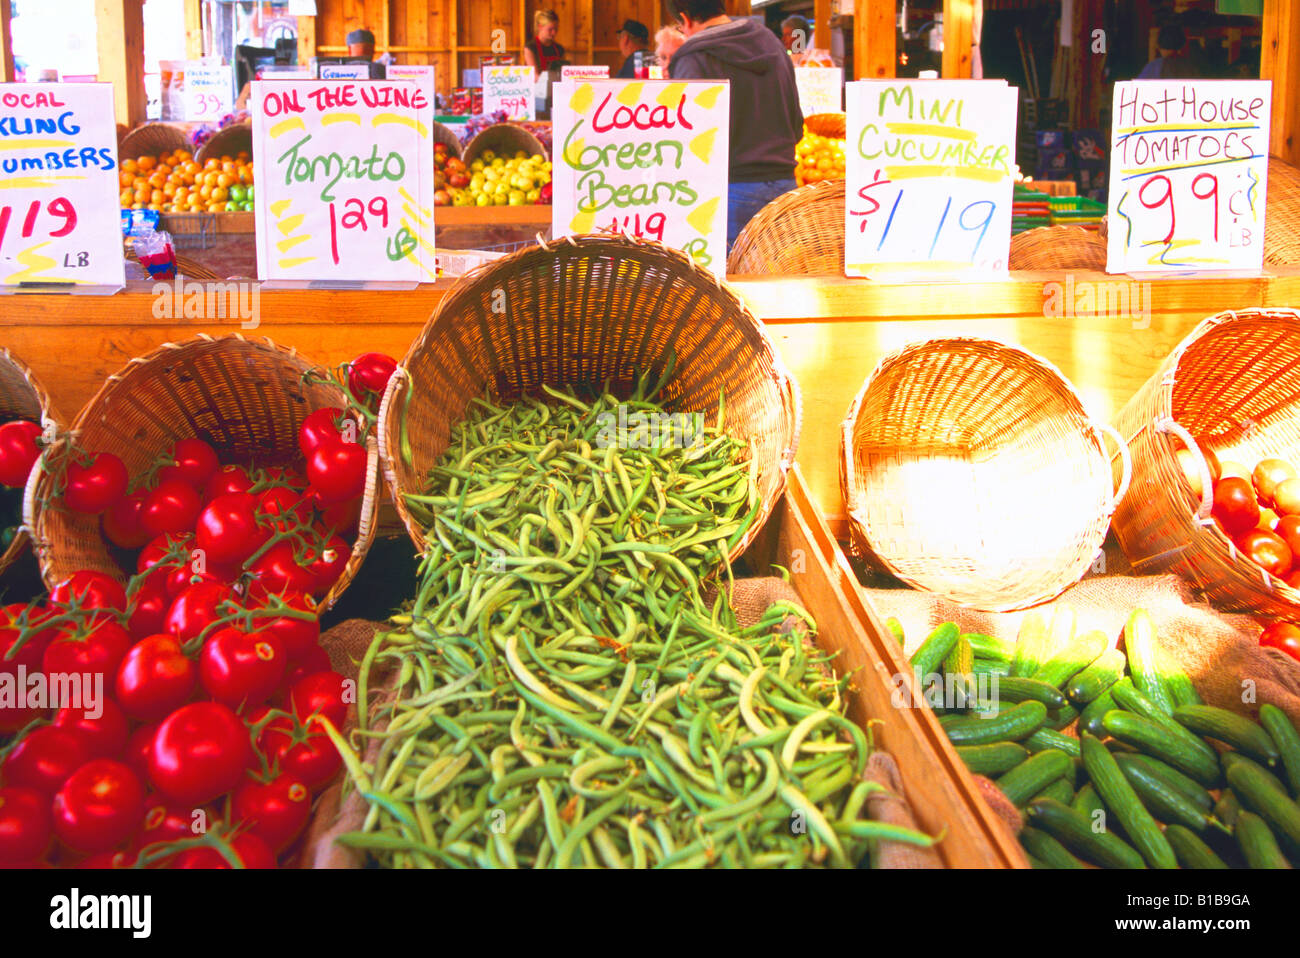 Duncan, Vancouver Island, BC, British Columbia, Canada - Farmer's Market, Fresh Local Tomatoes, Beans, and Vegetables for sale Stock Photo